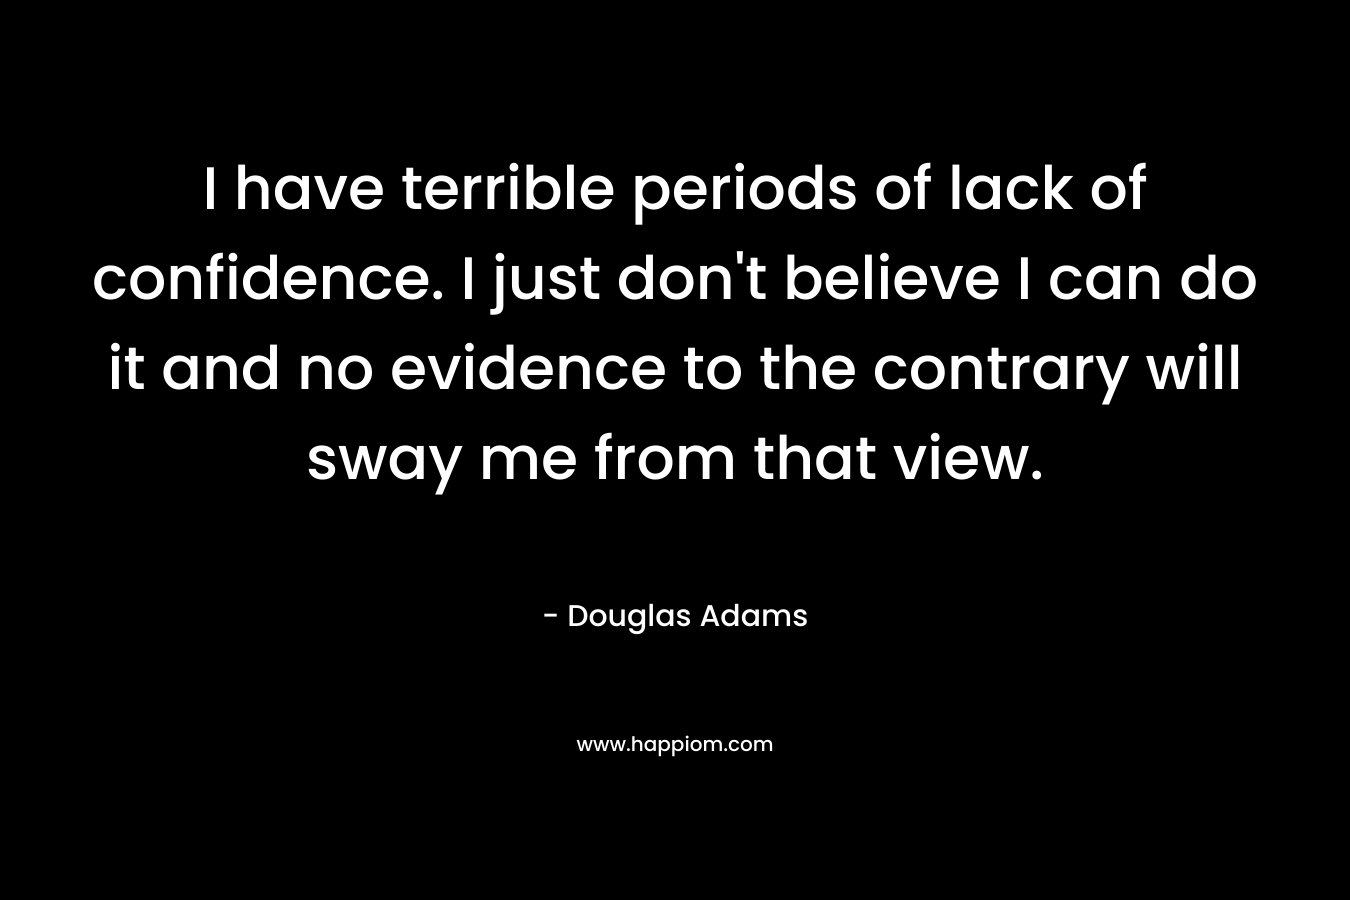 I have terrible periods of lack of confidence. I just don't believe I can do it and no evidence to the contrary will sway me from that view.